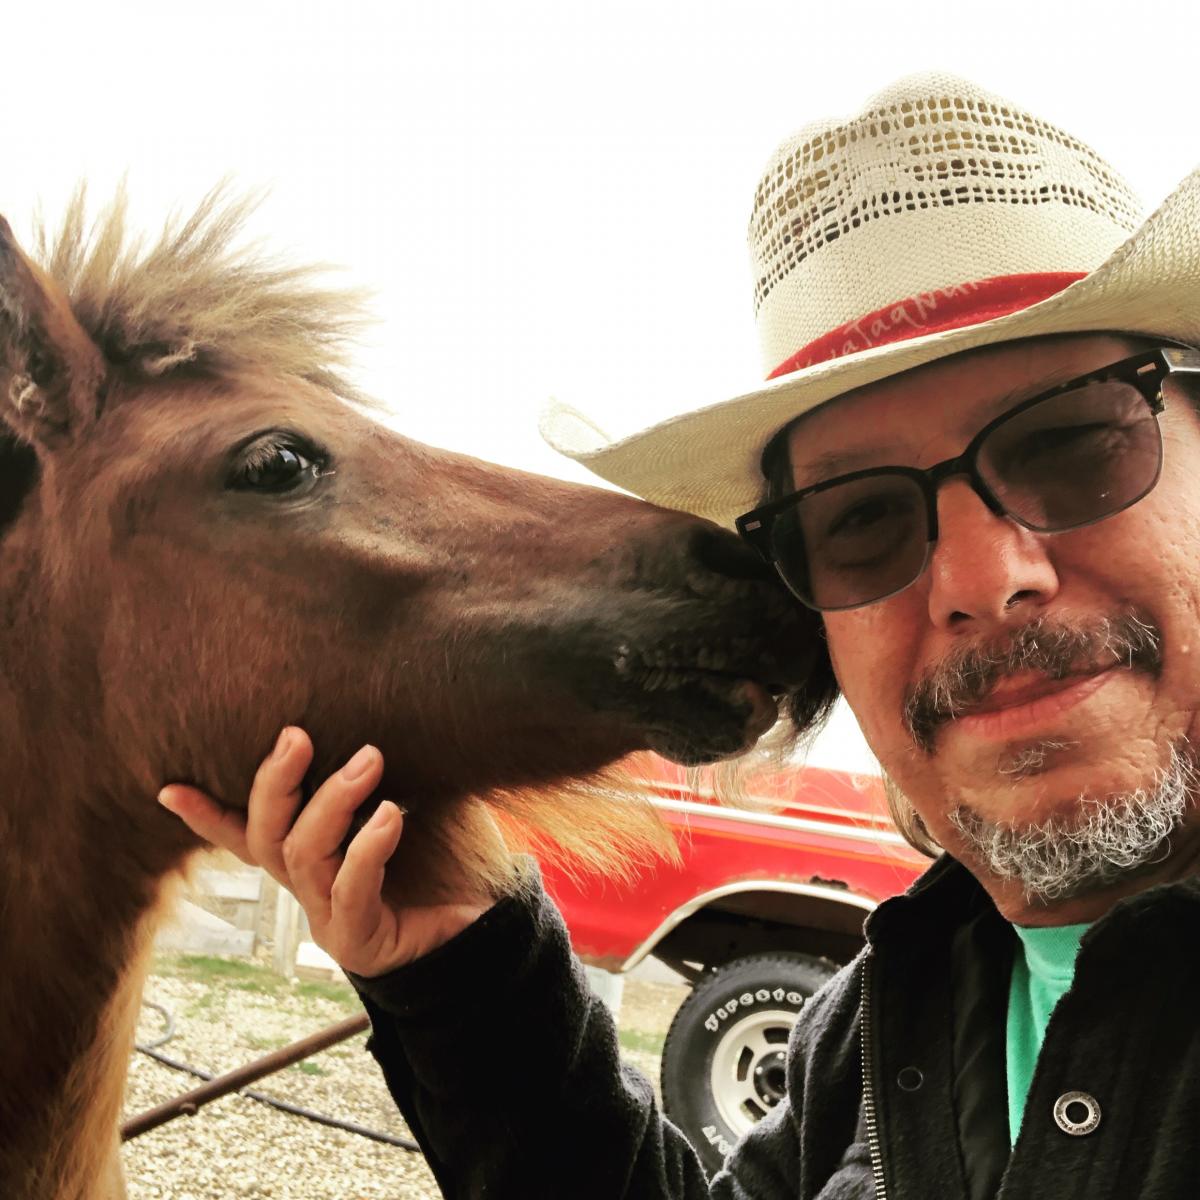 Man with mustache holding horse's head who is trying to lick the side of his face